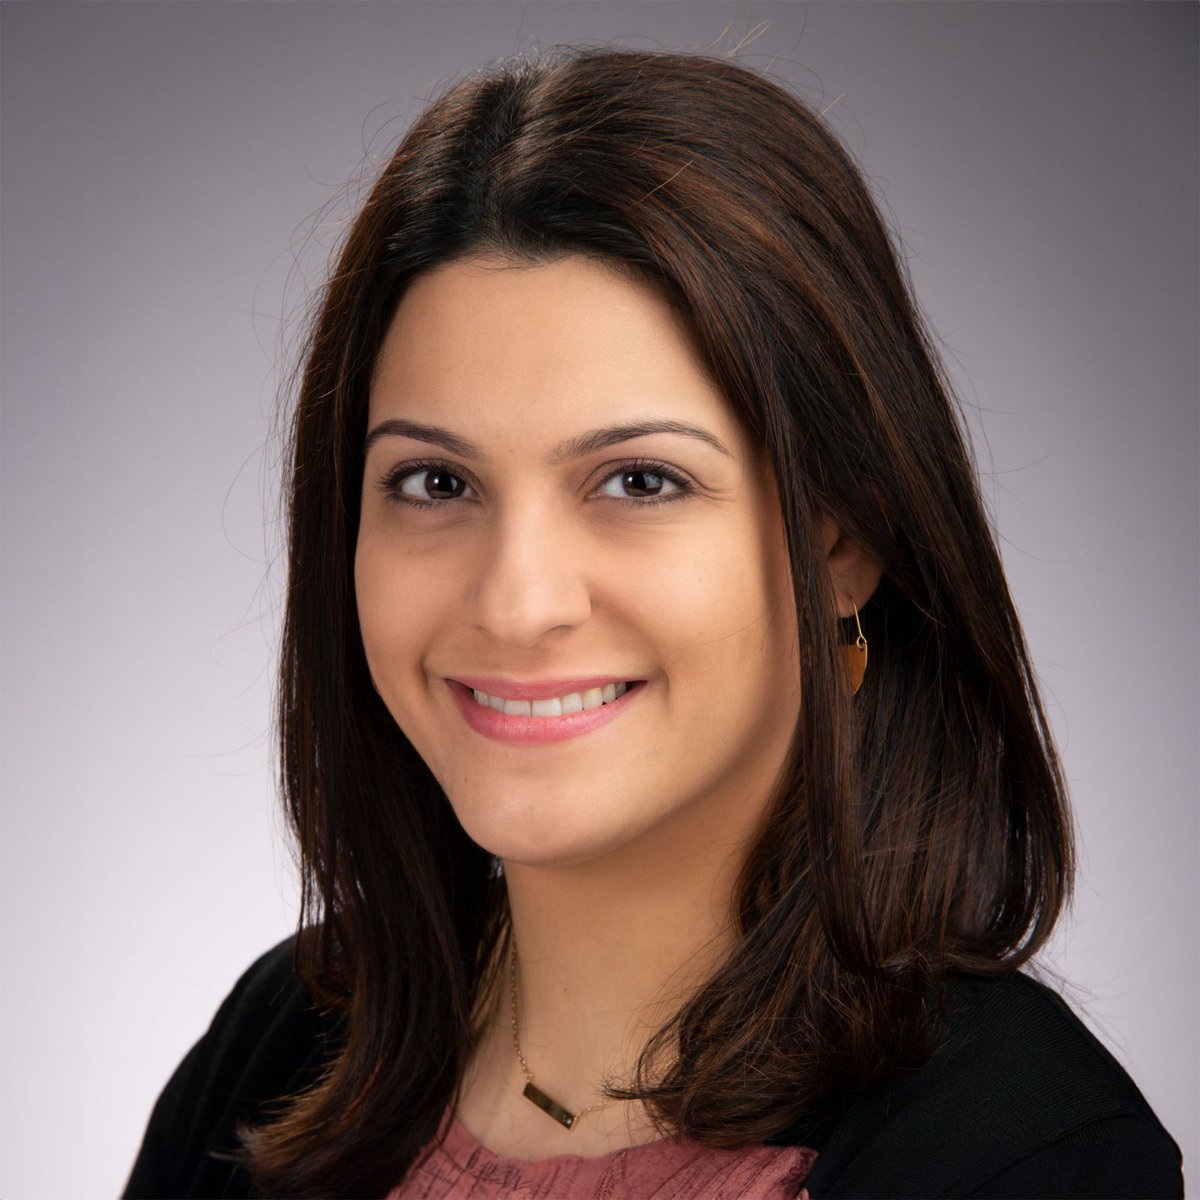 📣NOW SPEAKING📣 Sahar Barfchin, MD
Topic: Medical Hospitalizations for Children With Mental Health Conditions Before & During Covid 19
Location: @Nemours Children's booth #717
#PAS2024 #PASMeeting #KidsHealth #WellBeyondMedicine